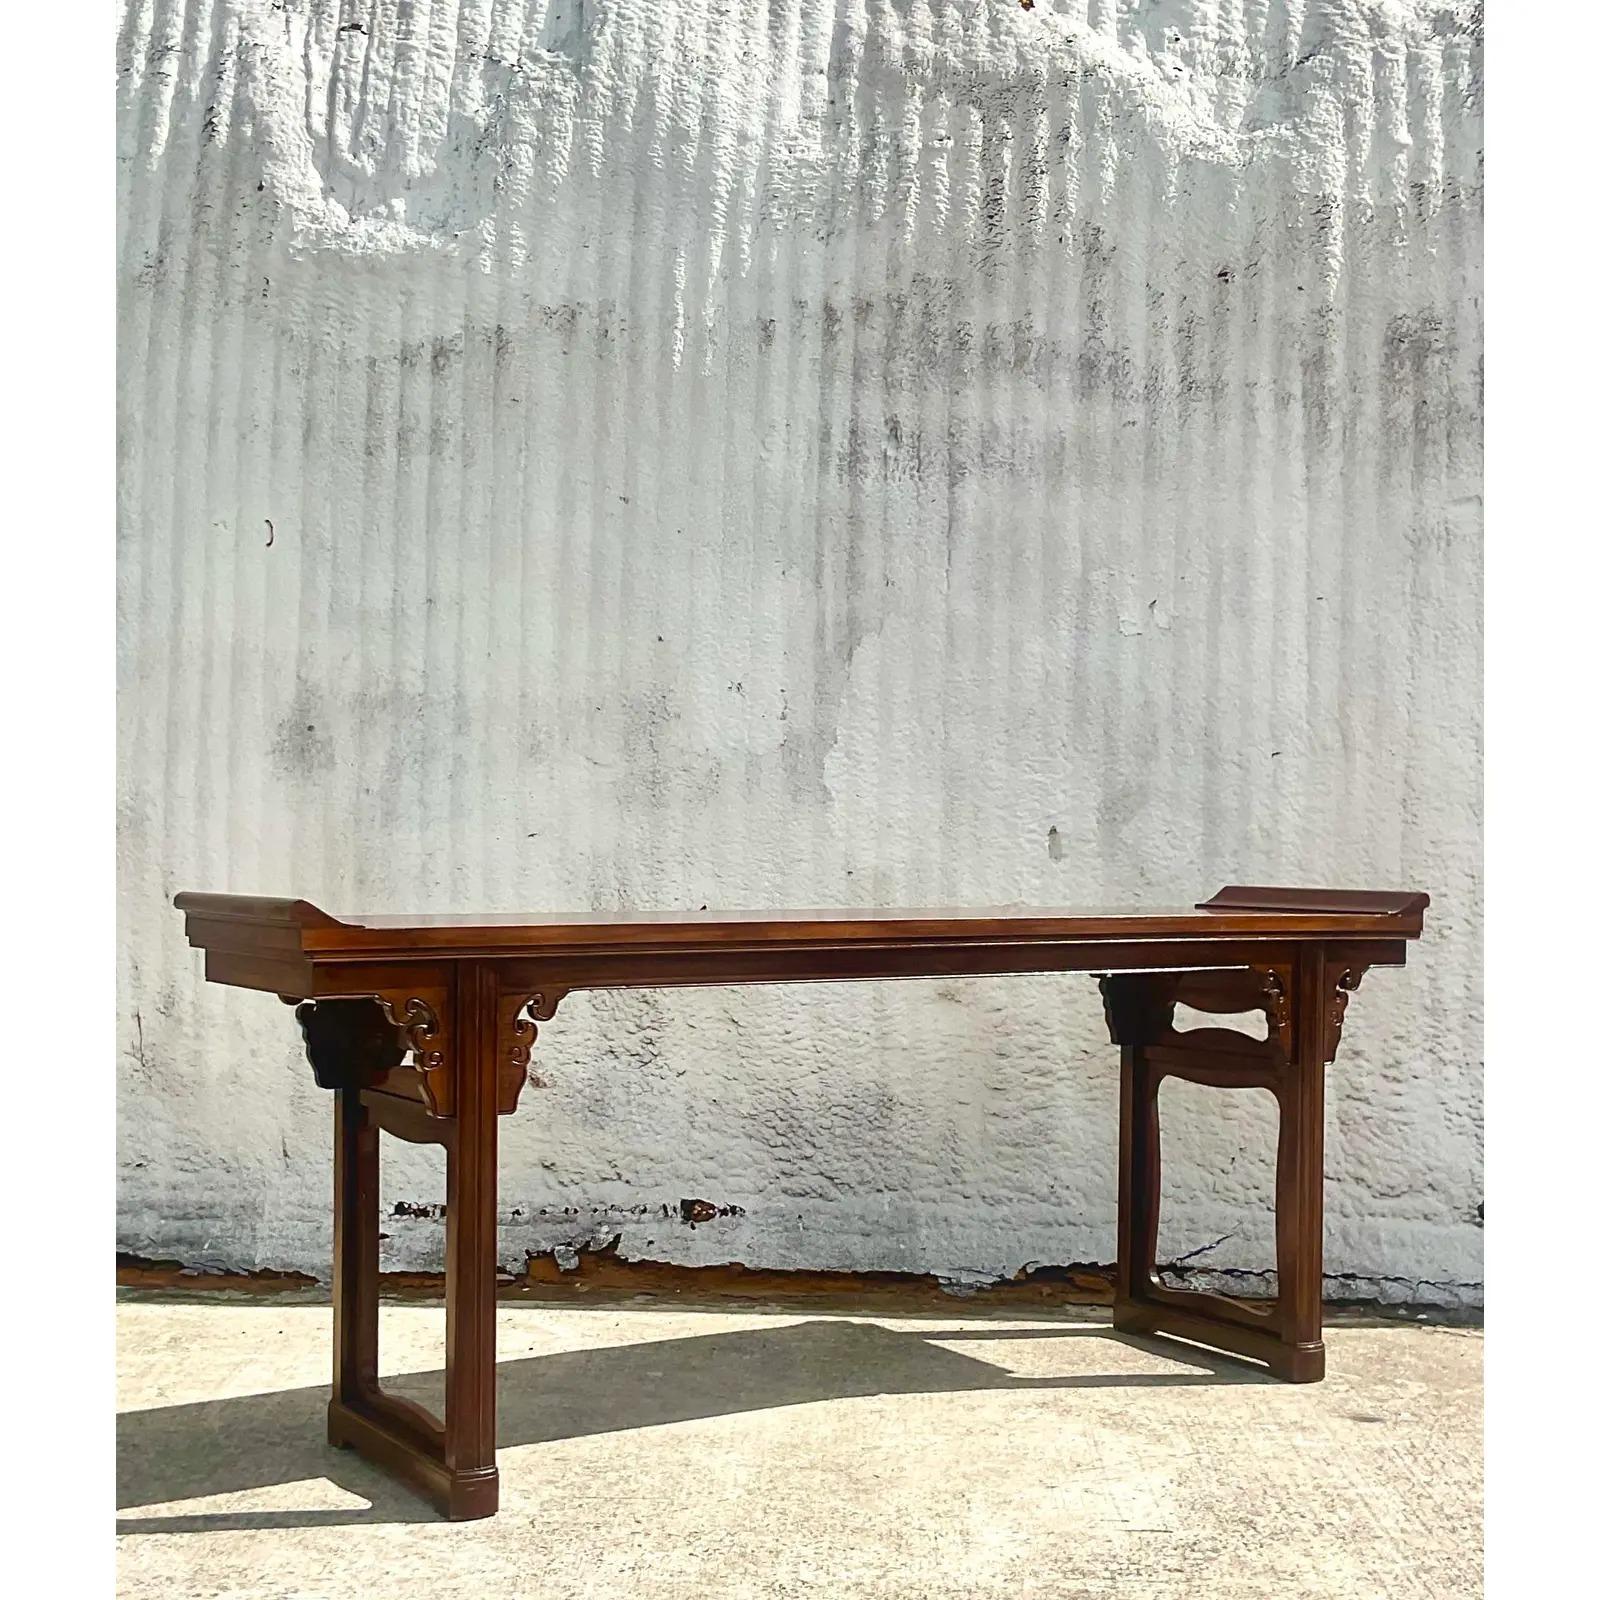 An outstanding vintage Asian console table. A chic altar design with pagoda sides. Made by the iconic Baker Furniture group. Acquired from a Palm Beach estate.